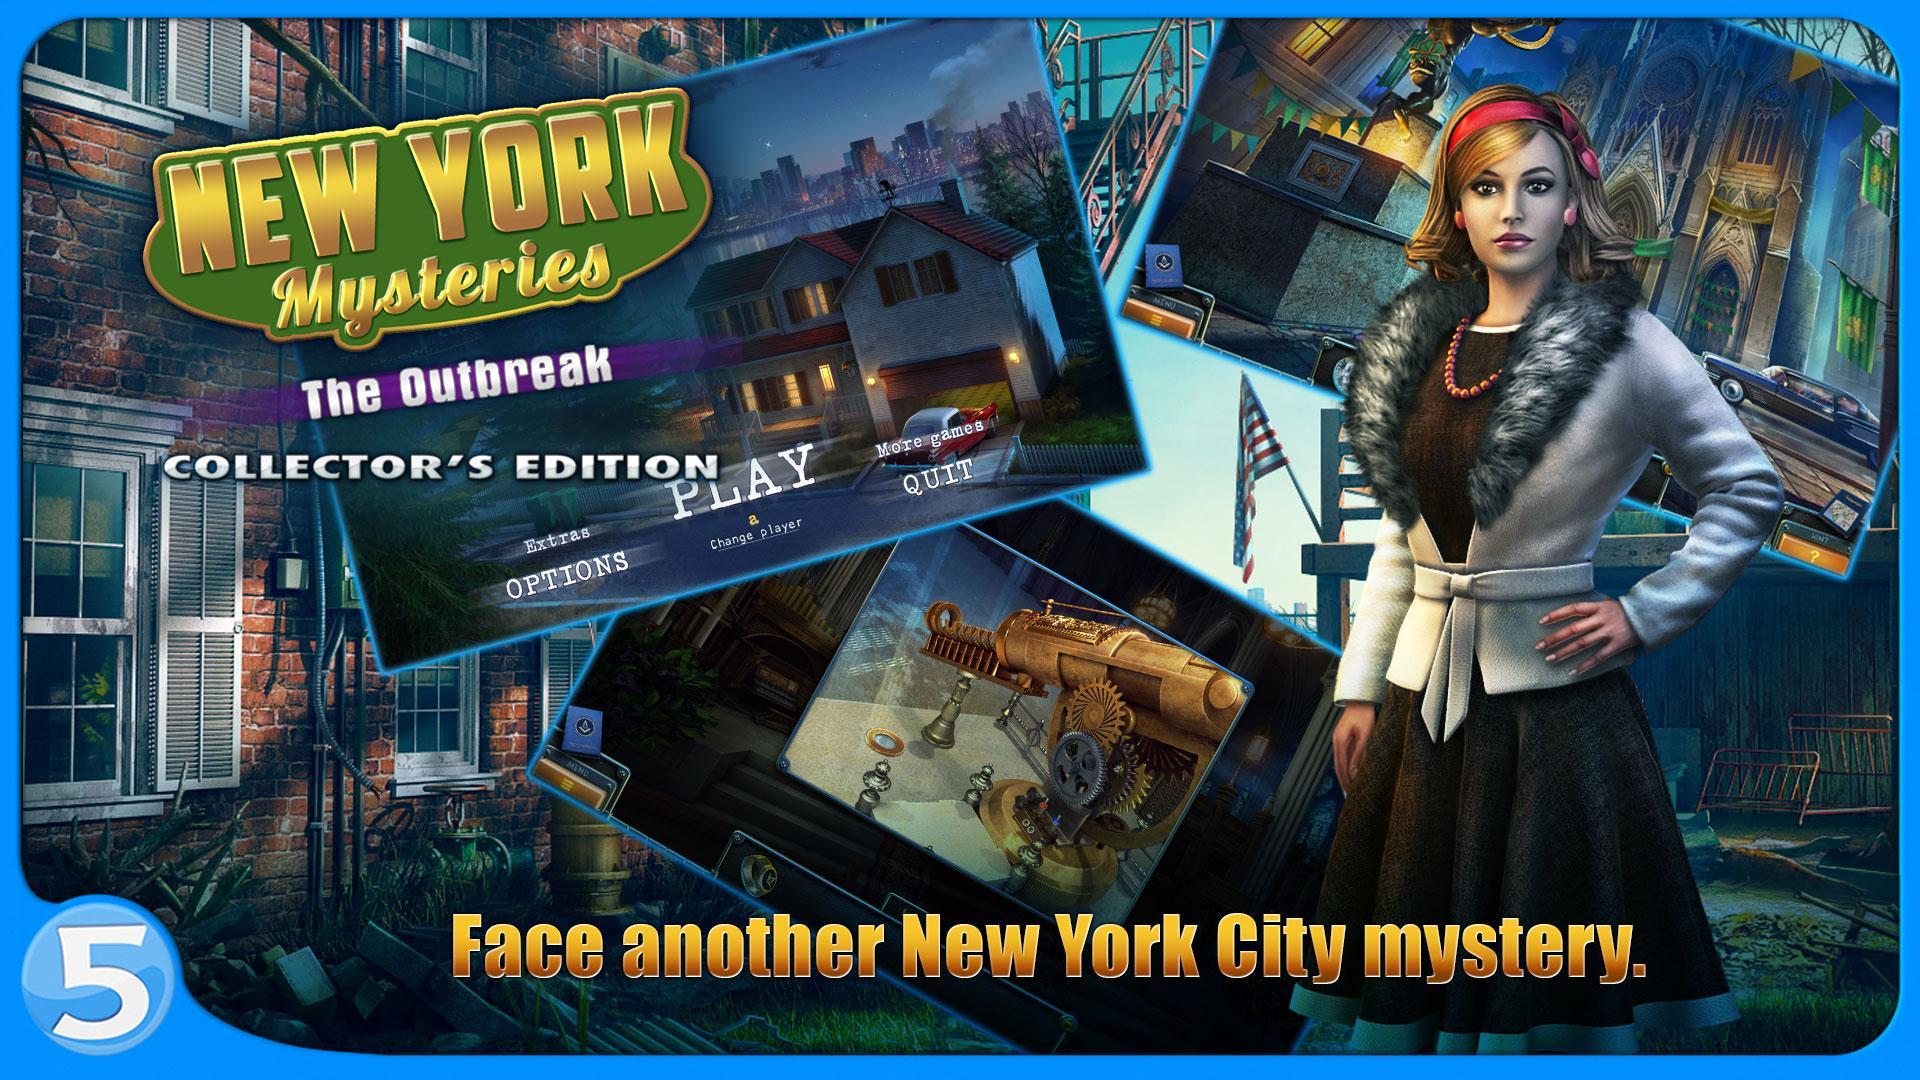 New York Mysteries: The Outbreak (free to play) 2.0.1.923.49 Screenshot 1